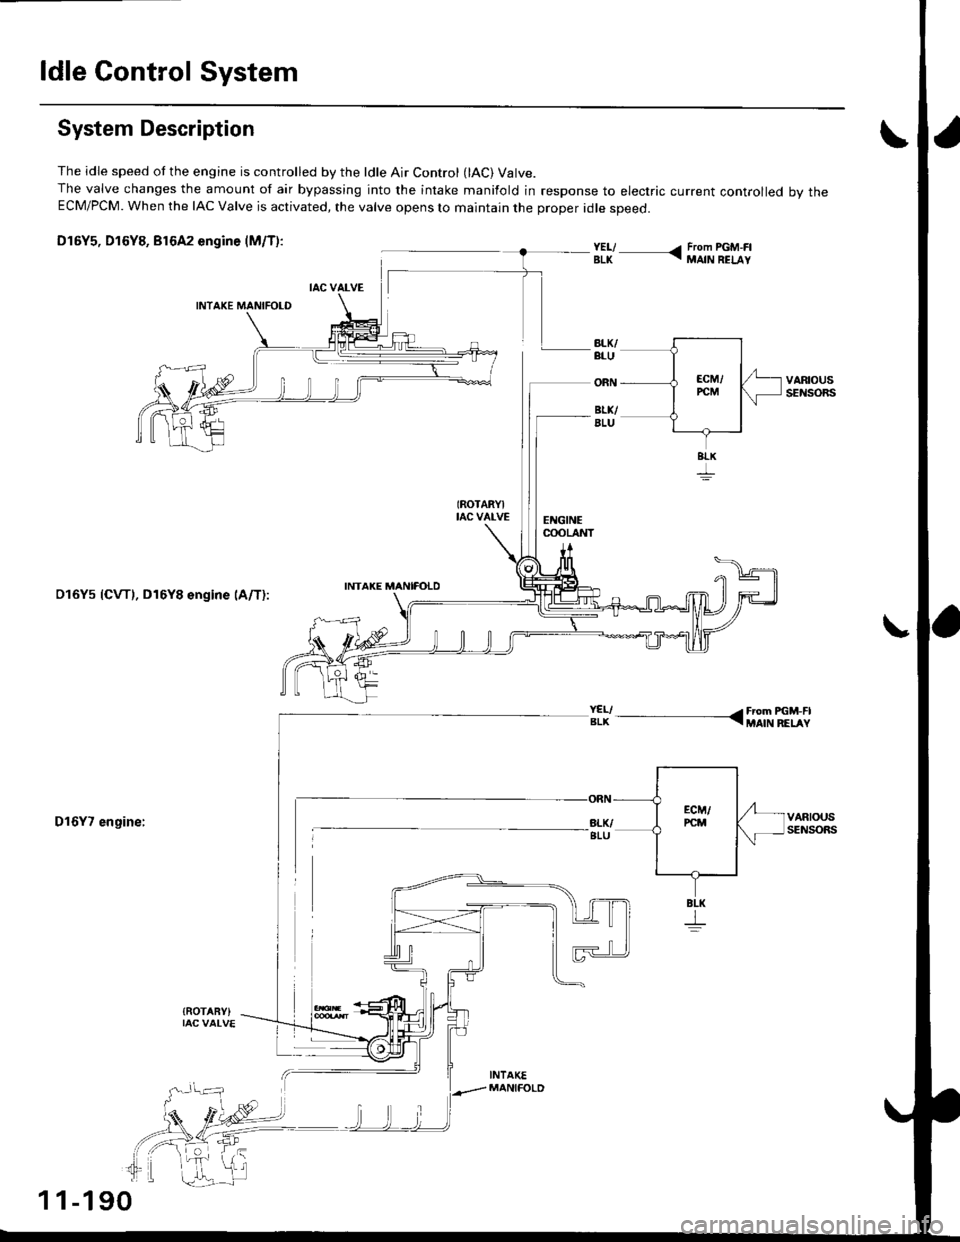 HONDA CIVIC 1996 6.G Service Manual ldle Control System
System Description
The idle speed ot the engine is controlled by the ldle Air Control (lAC) Valve.The valve changes the amount of air bypassing into the intake manifold in response